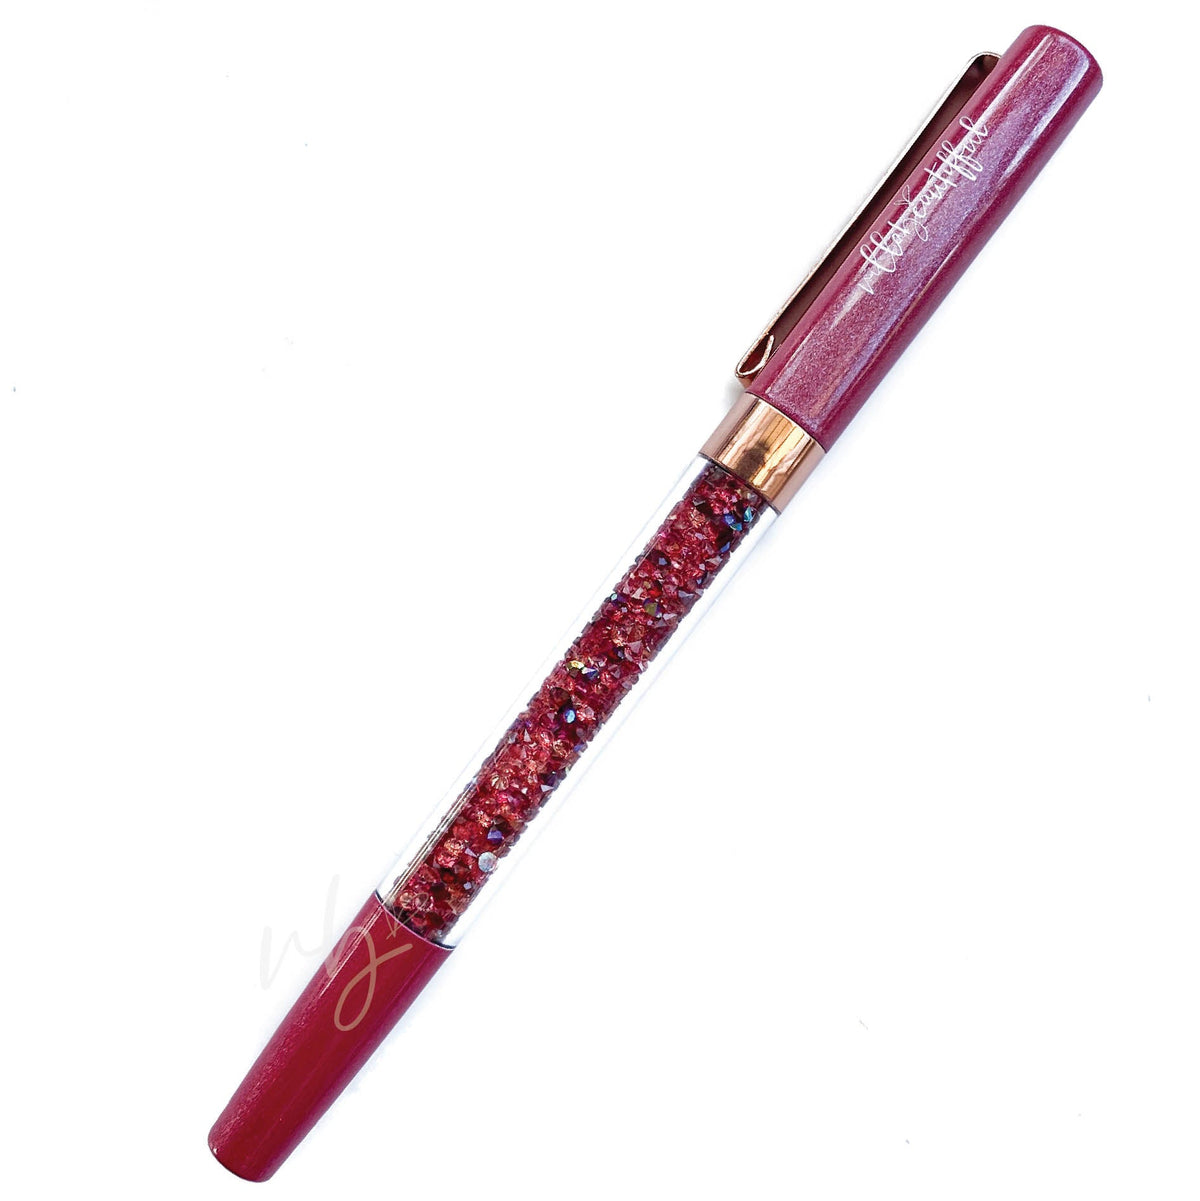 Aries Imperfect Crystal VBPen | limited pen